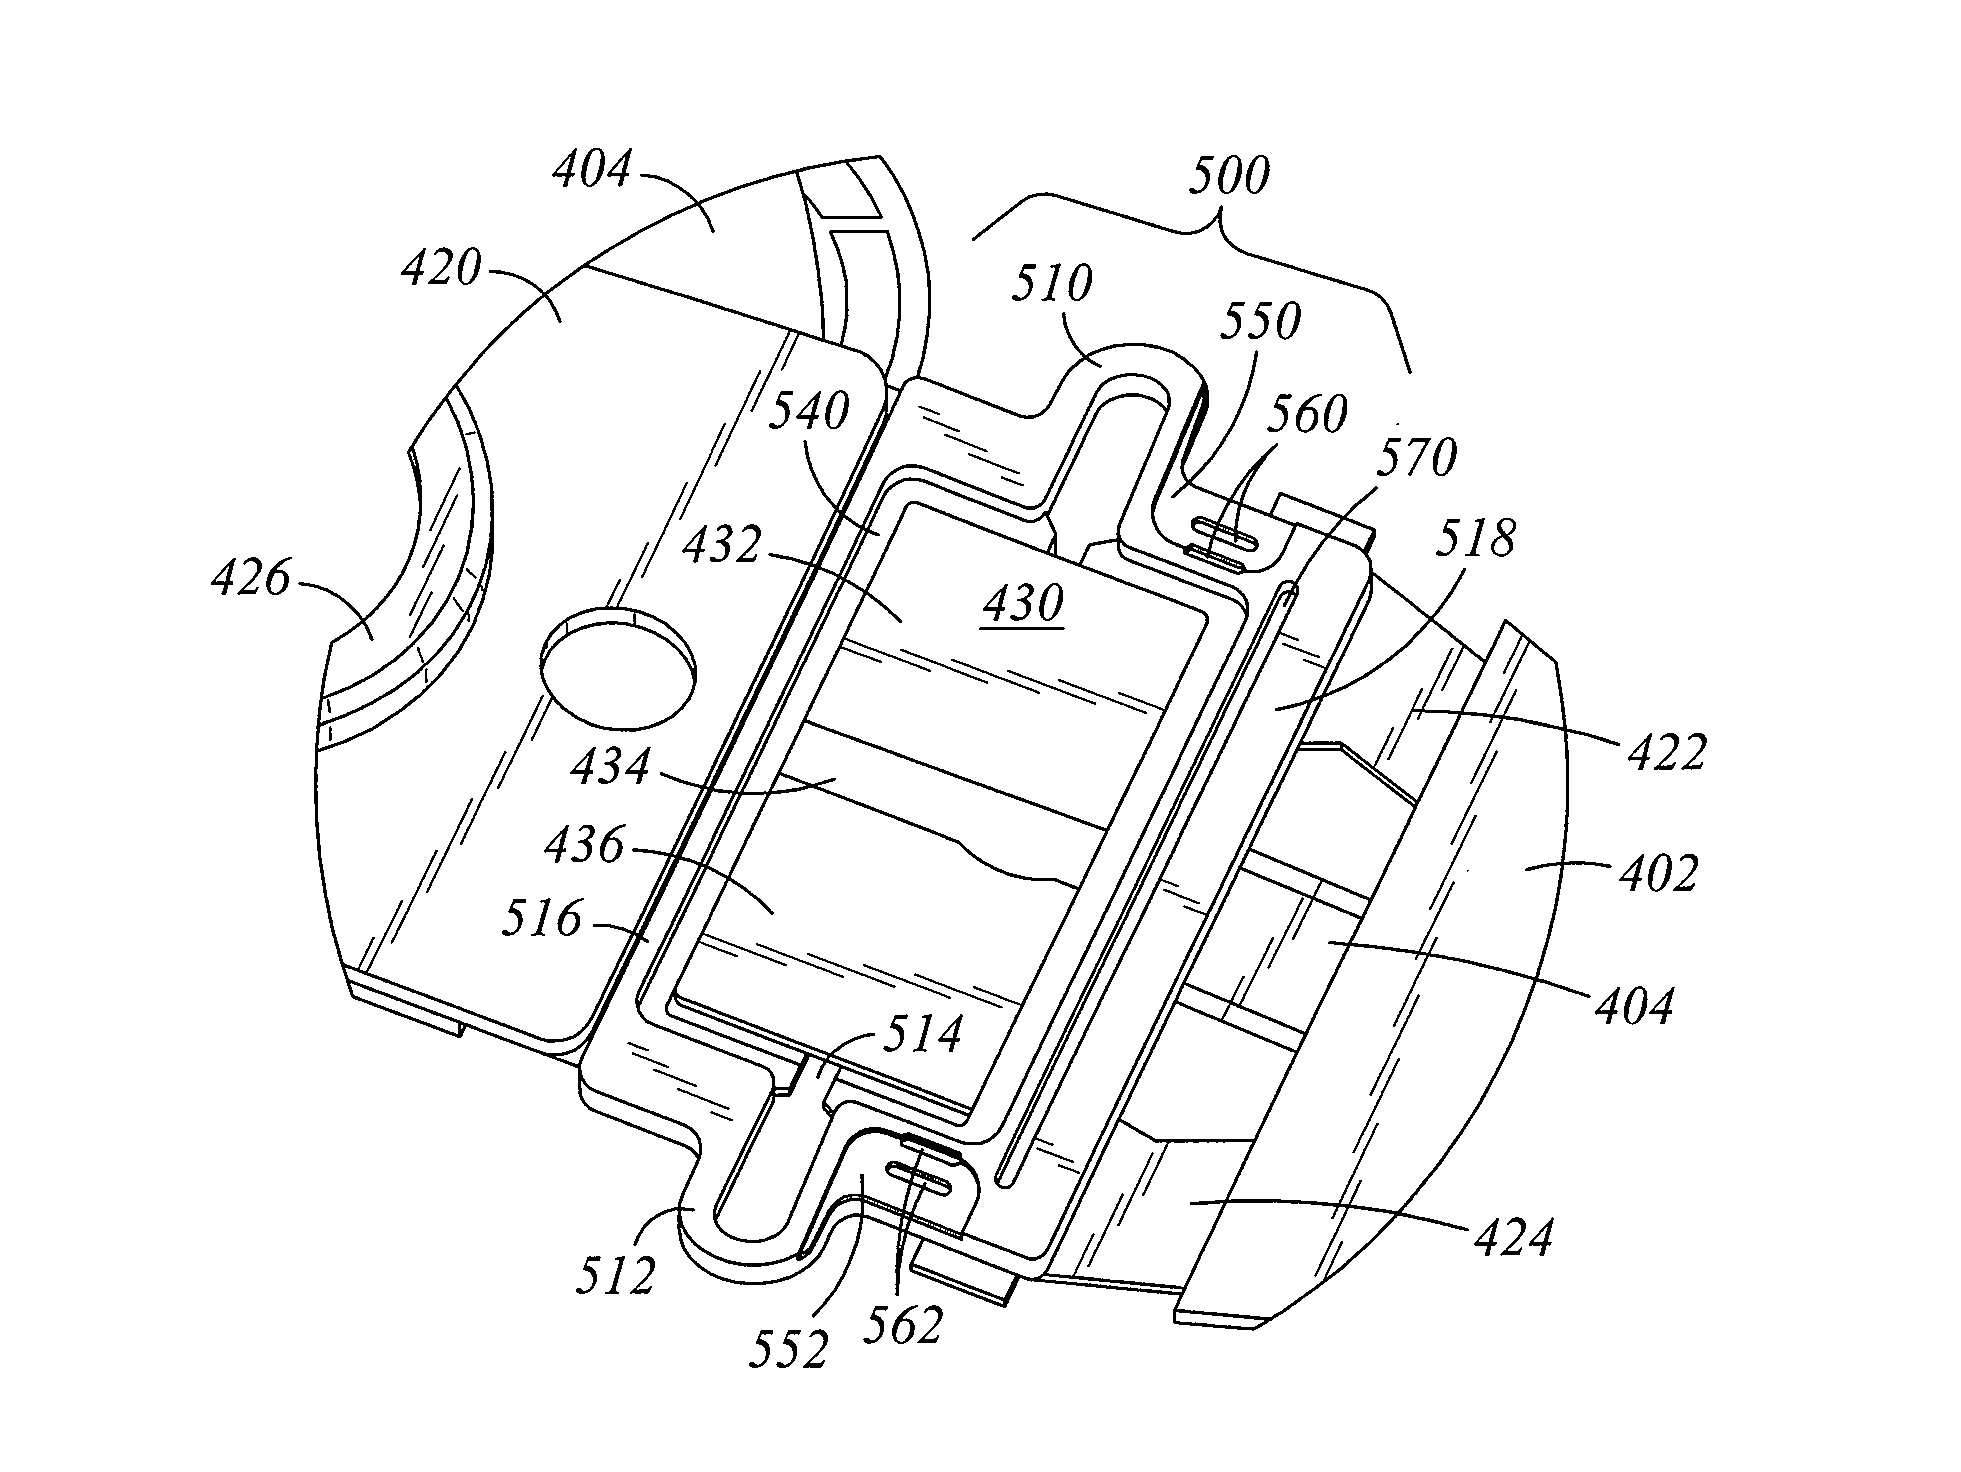 Suspension assembly having a microactuator electrically connected to a gold coating on a stainless steel surface